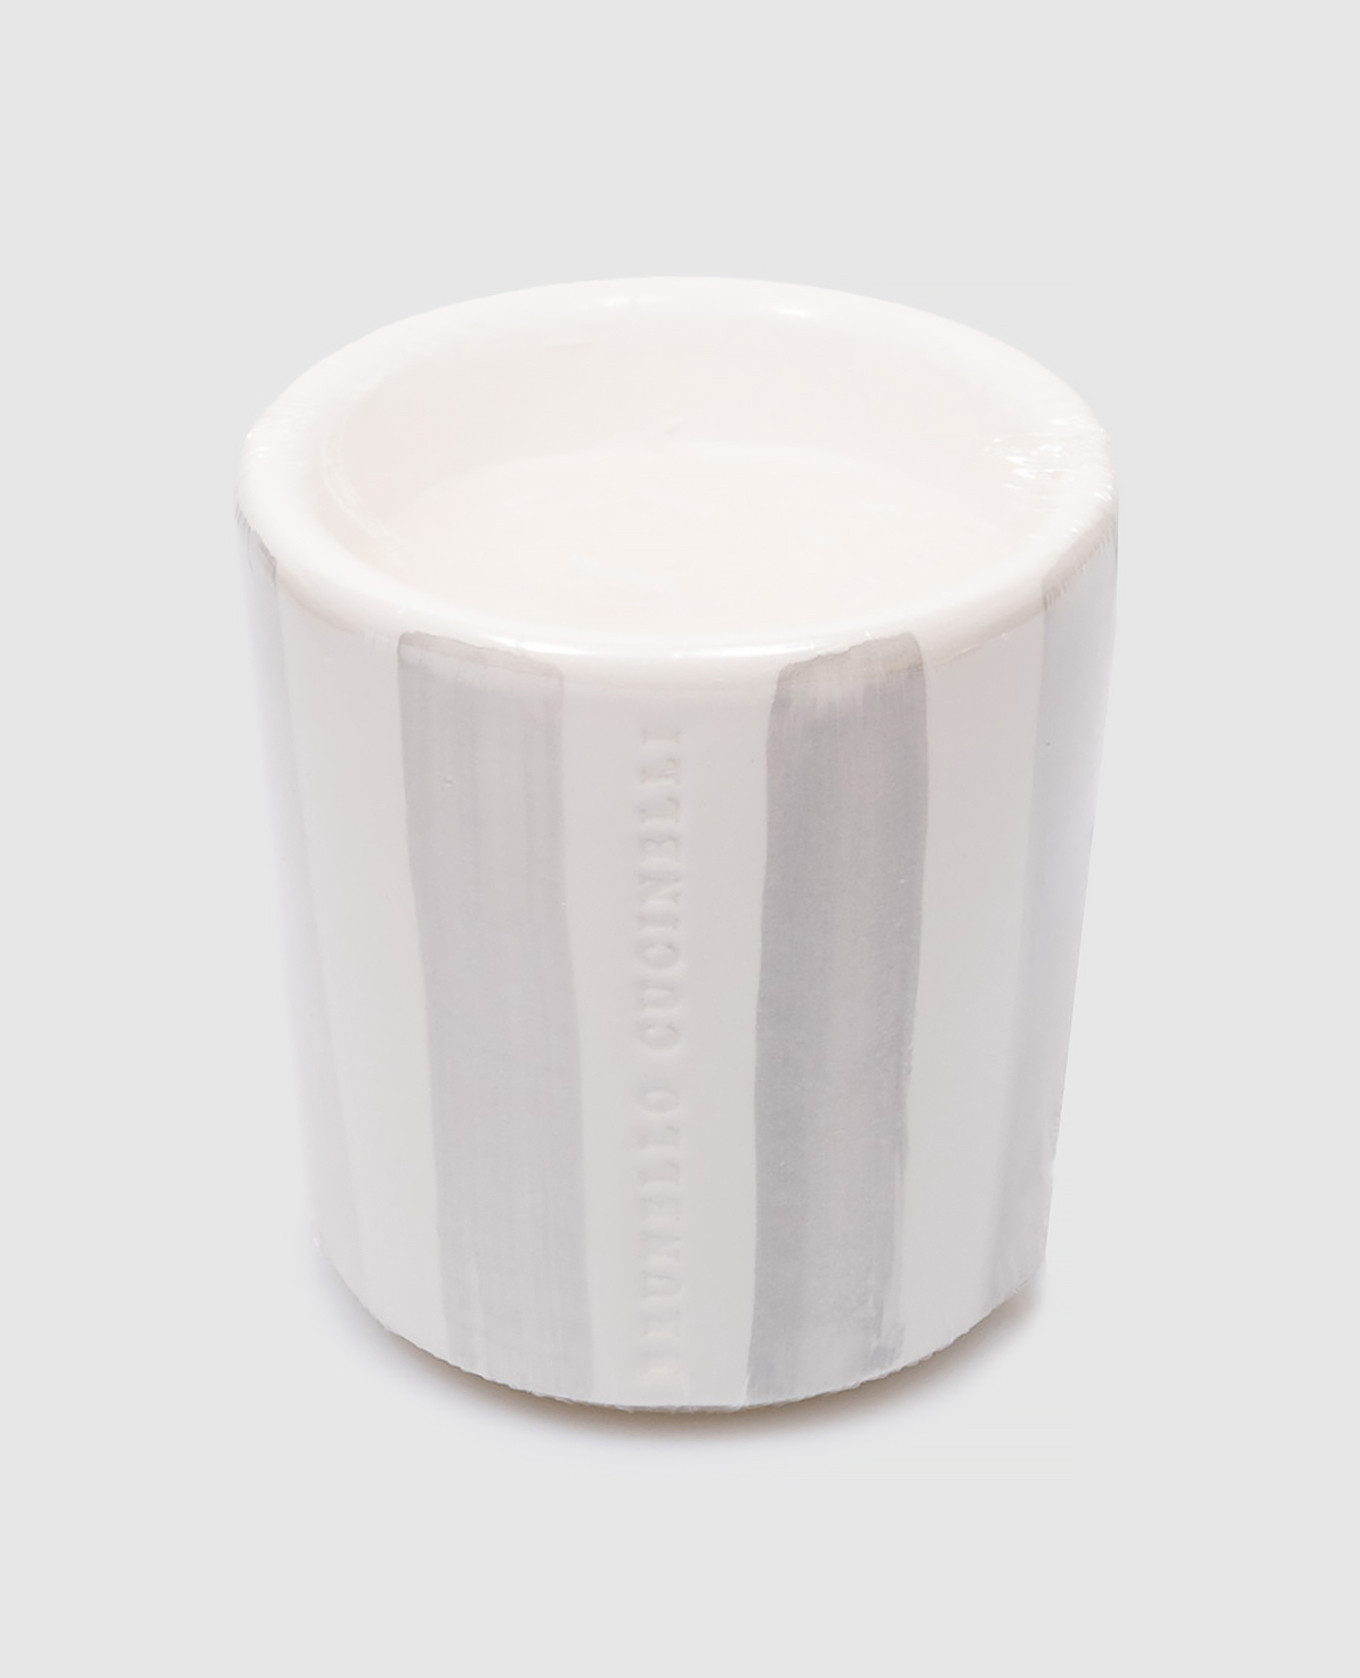 Scented candle in a gray striped ceramic candle holder with a logo